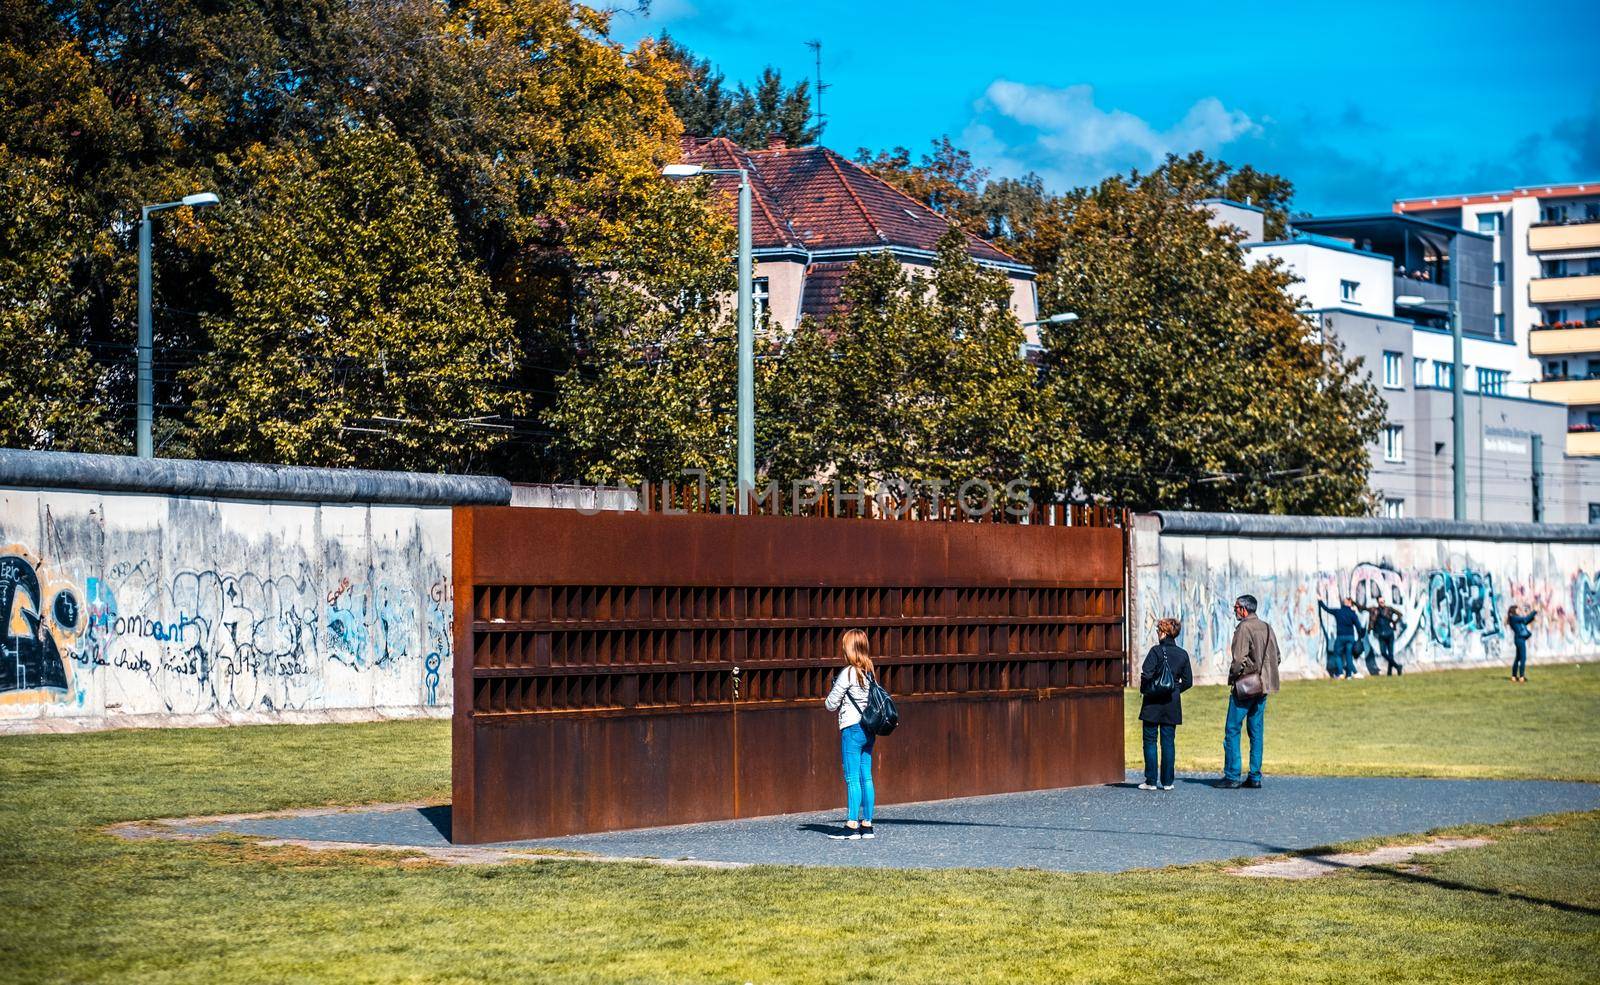 Berlin, Germany - 20 September 2019: Tourists near Berlin Wall memorial at sunny day